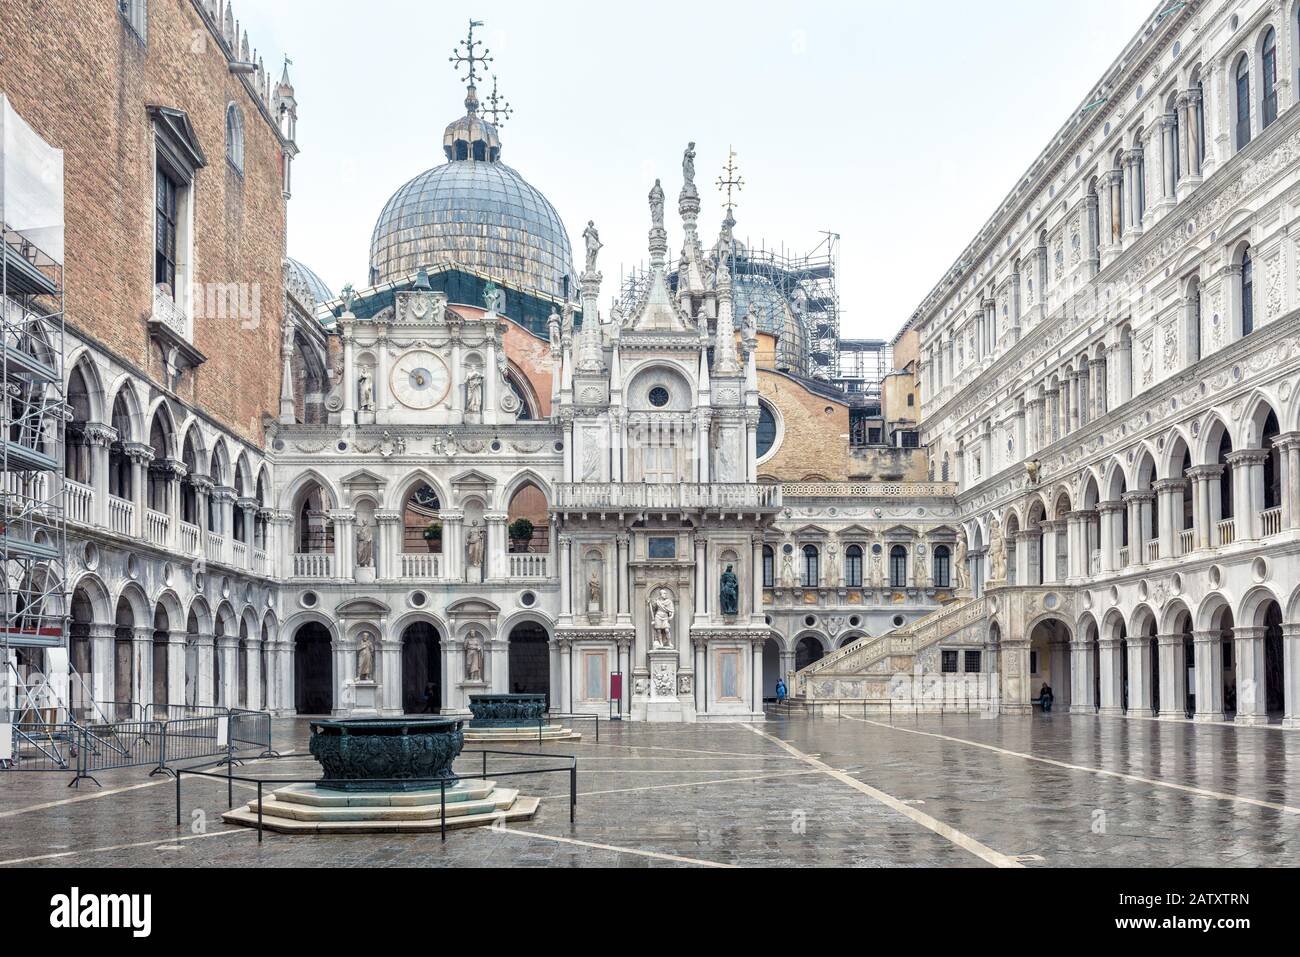 Courtyard of Doge`s Palace or Palazzo Ducale, Venice, Italy. Doge`s Palace is one of the main tourist attractions in Venice. Renaissance architecture Stock Photo